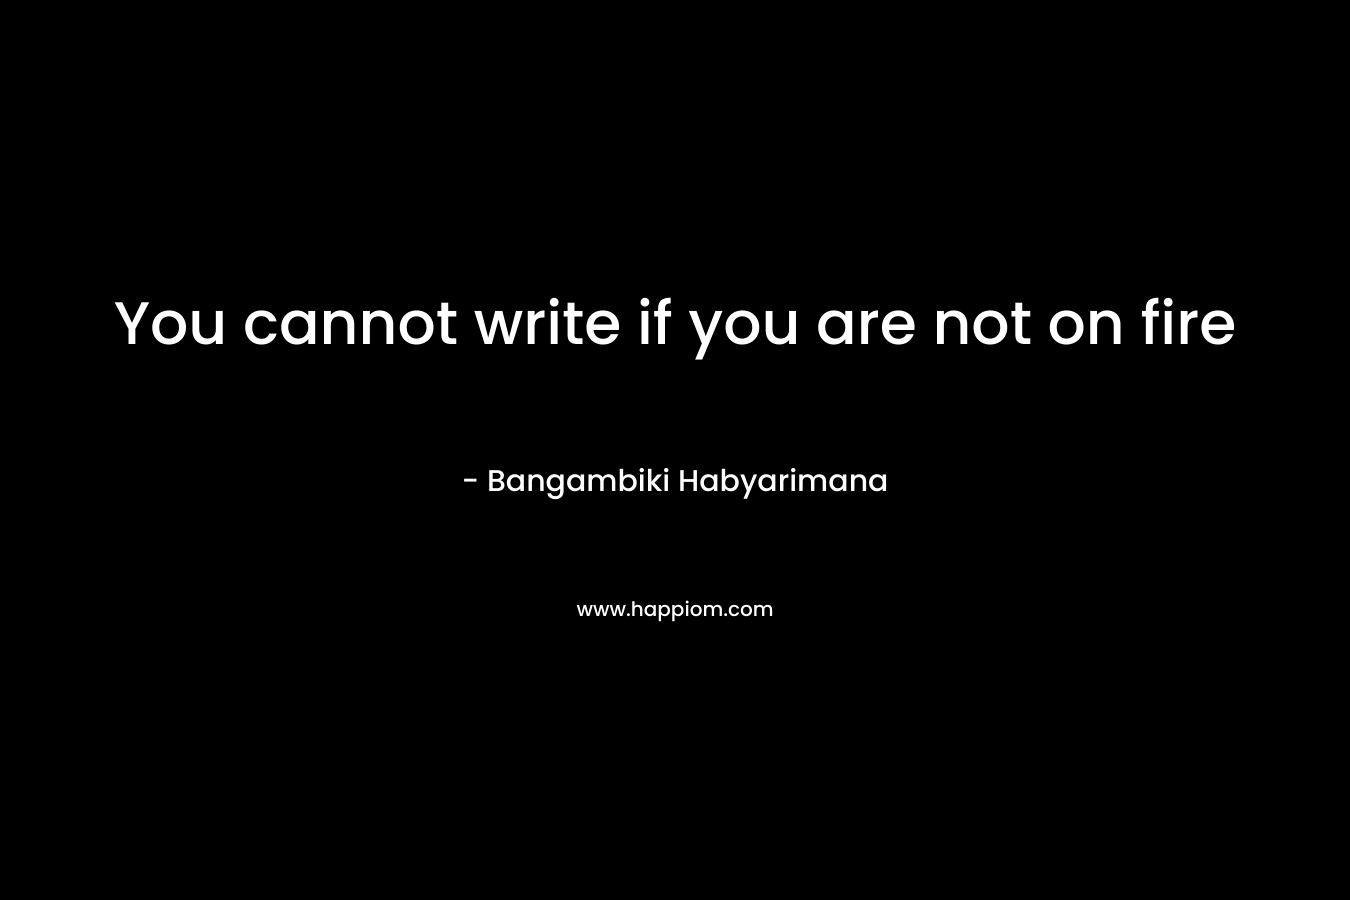 You cannot write if you are not on fire